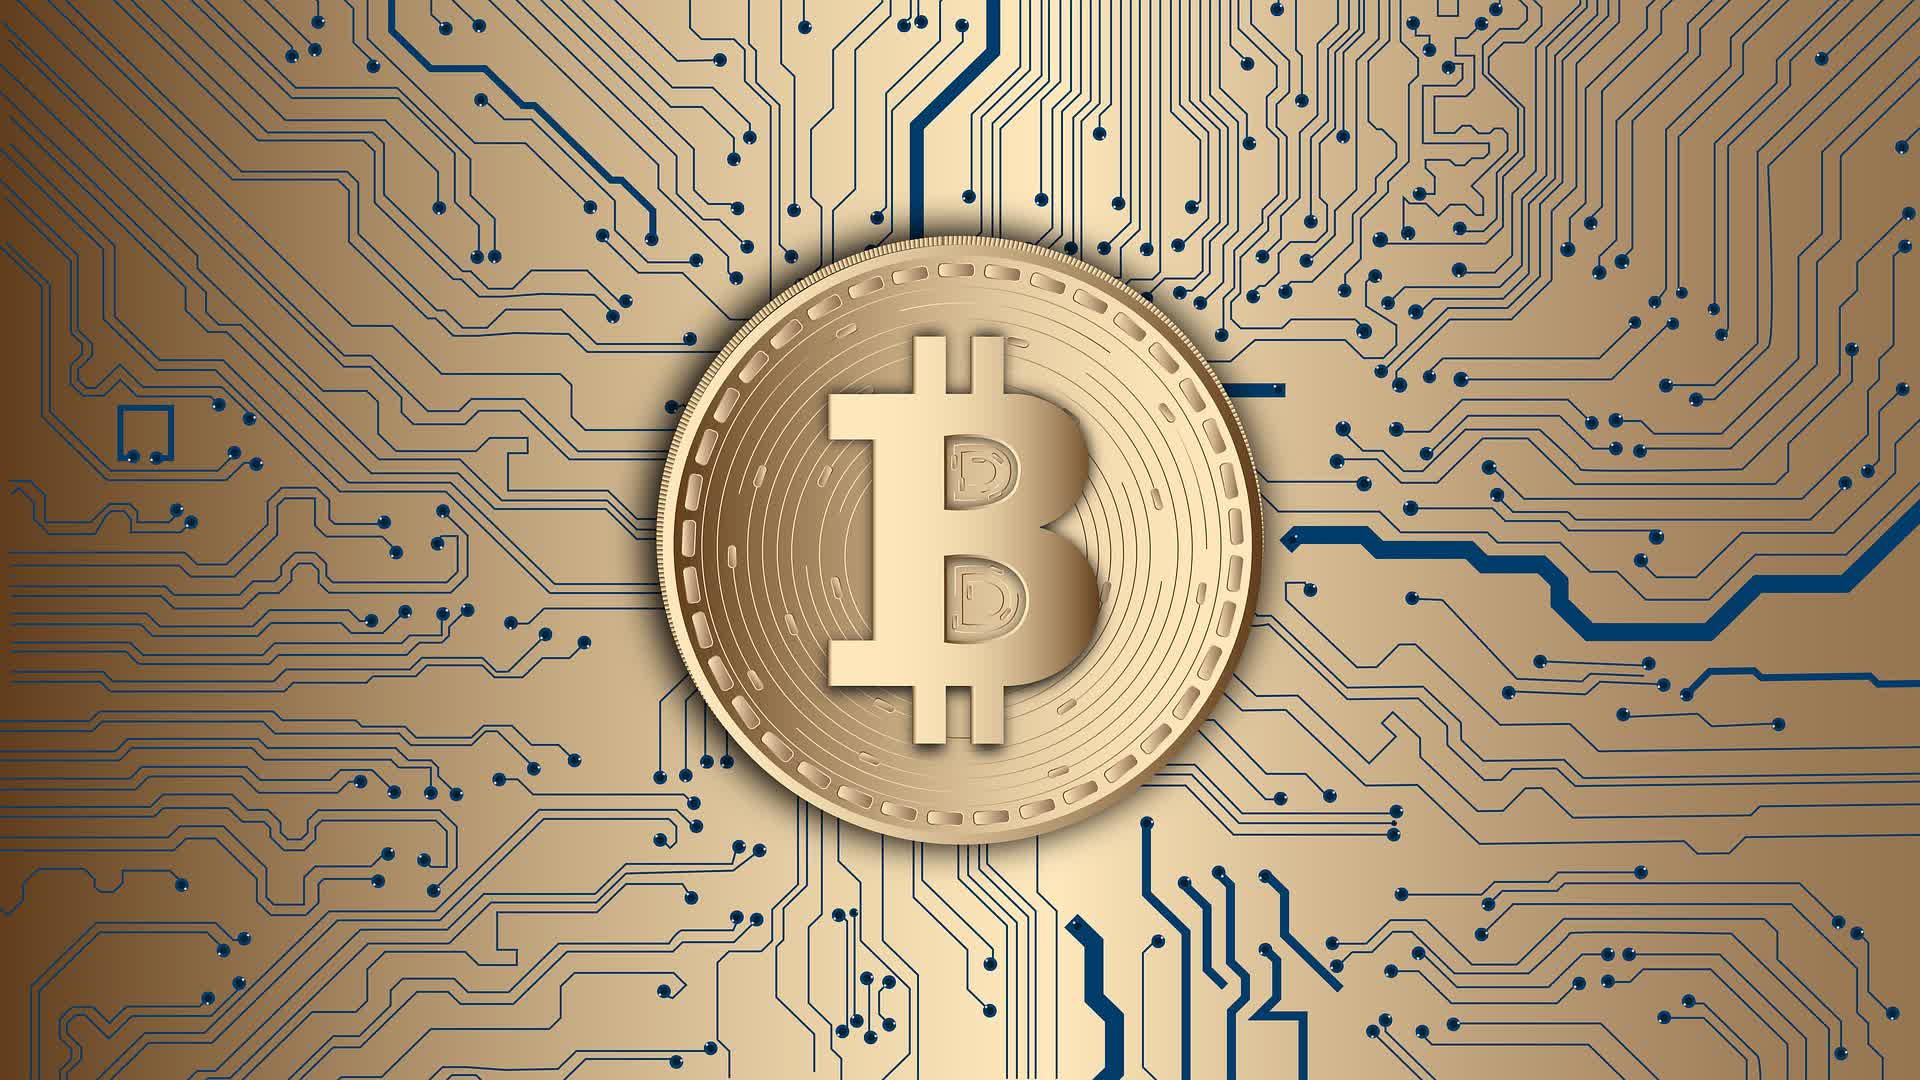 Counterfeit Bitcoin- The Dangers of Investing In Cryptocurrency by Dr. Stephen Leeb, Ph.D.